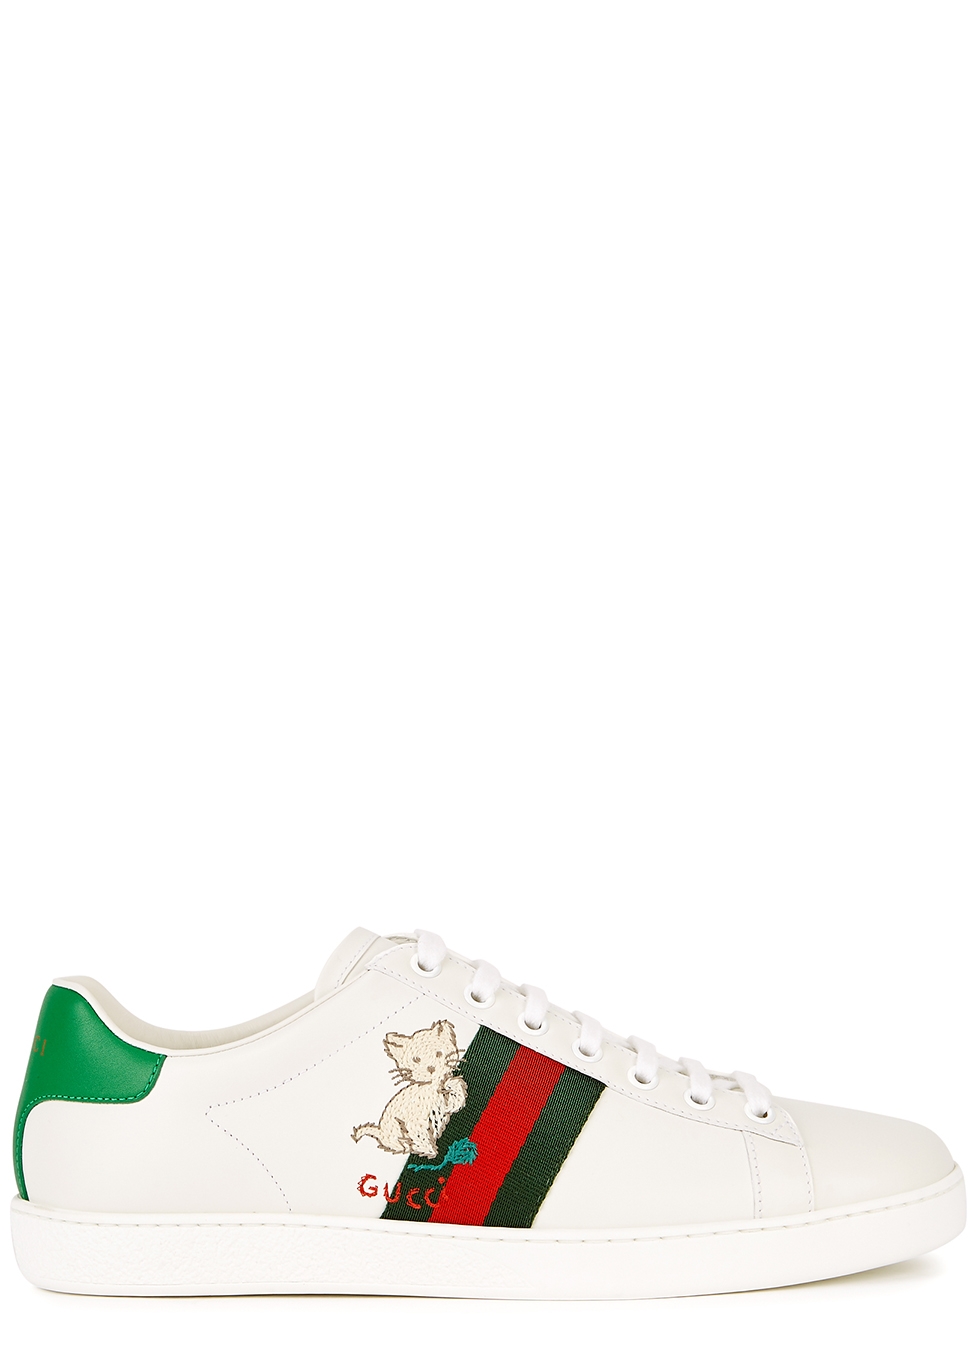 Gucci New Ace white embroidered leather 